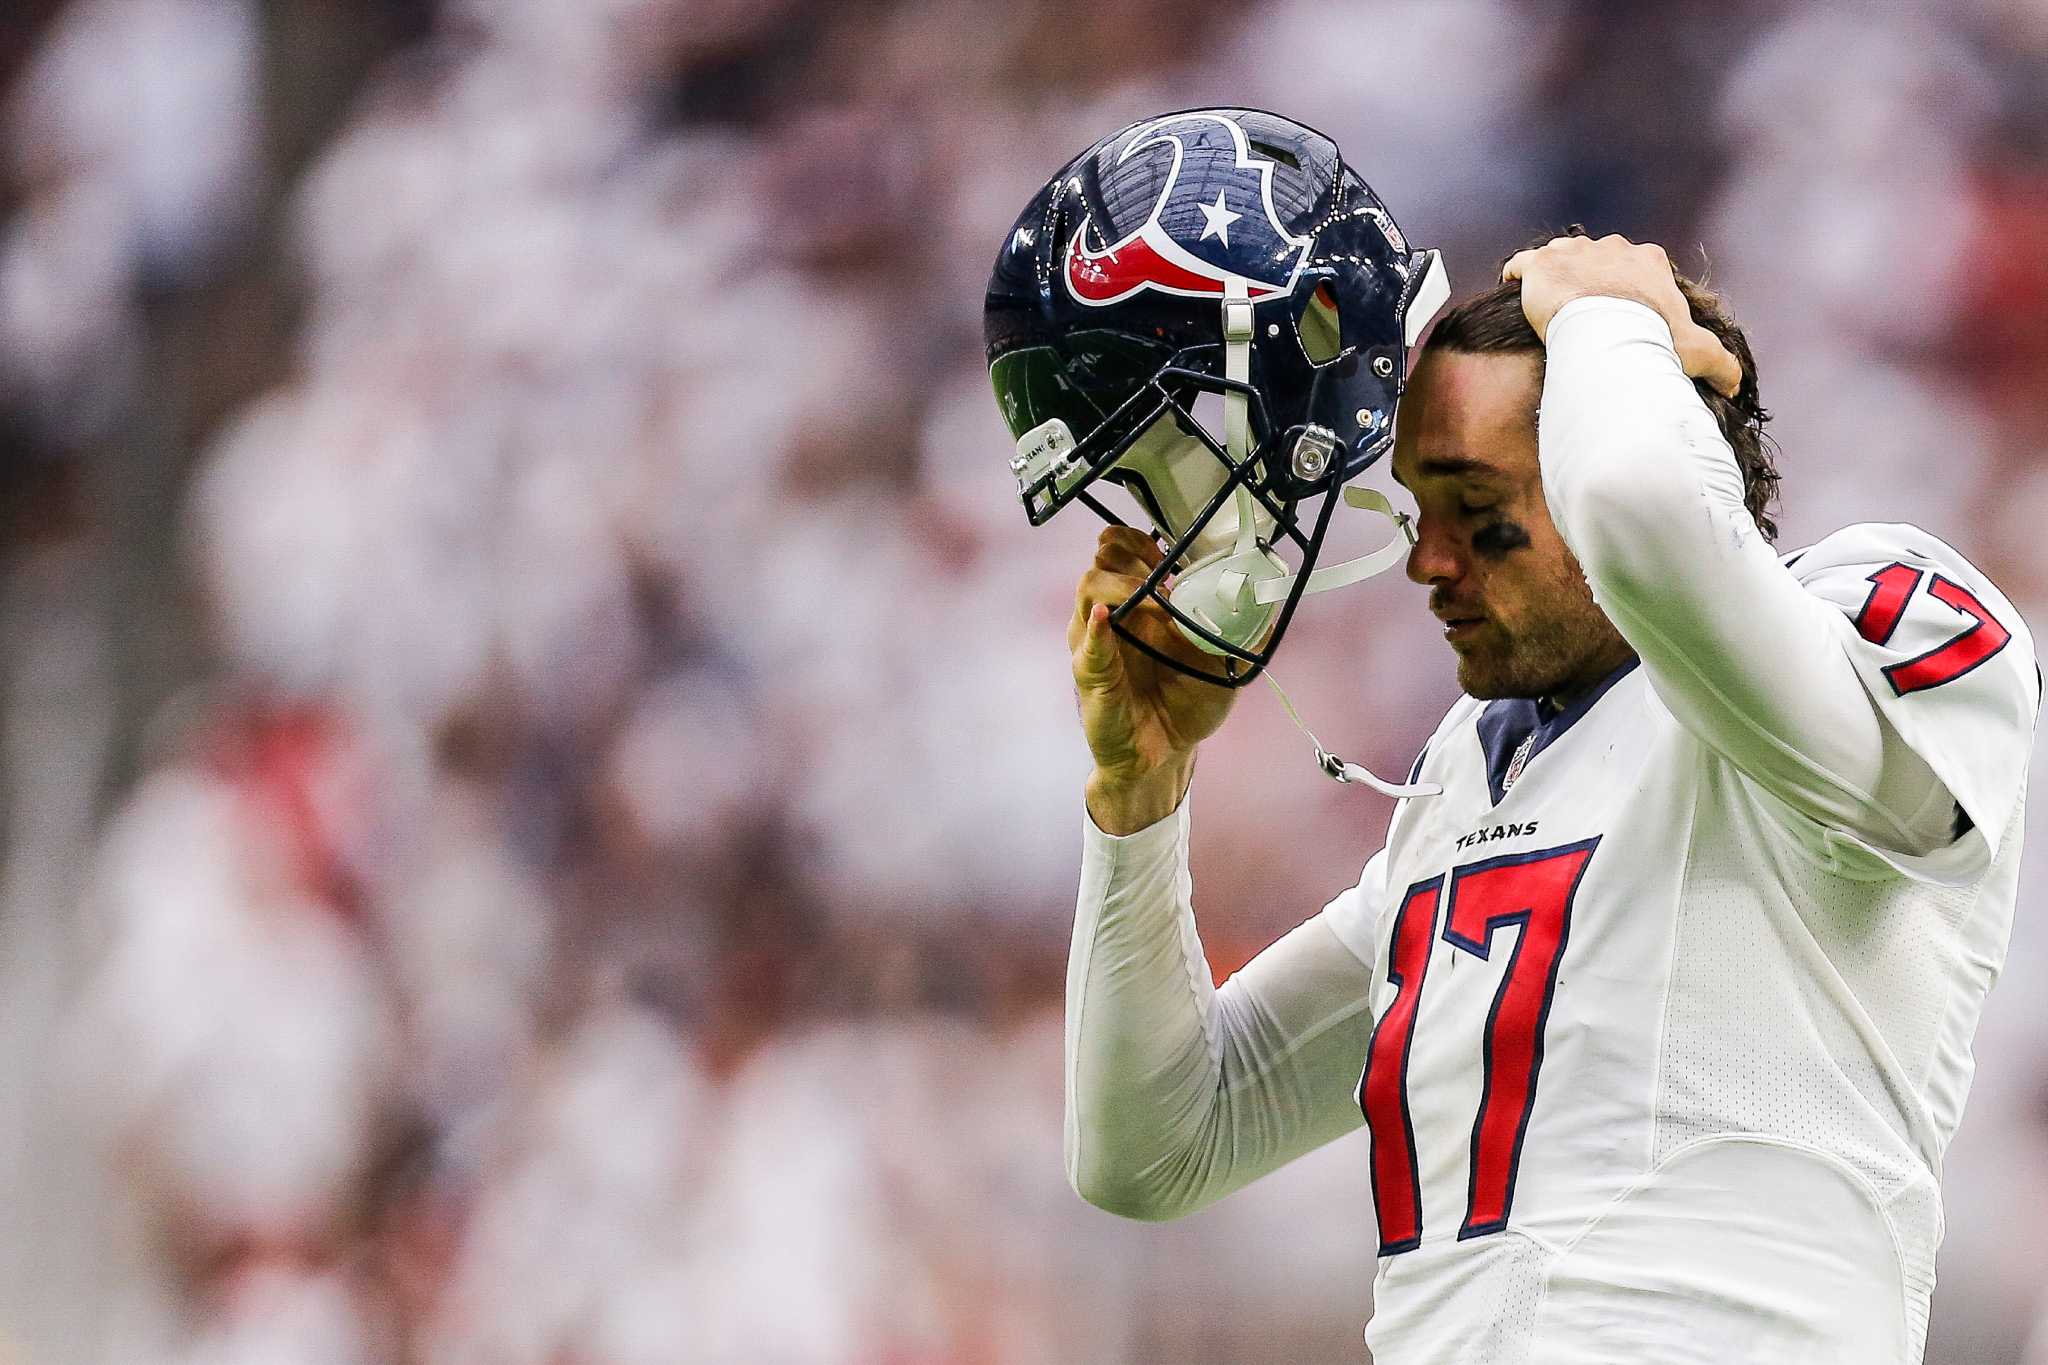 NFL experts weigh in on Brock Osweiler's start with Texans